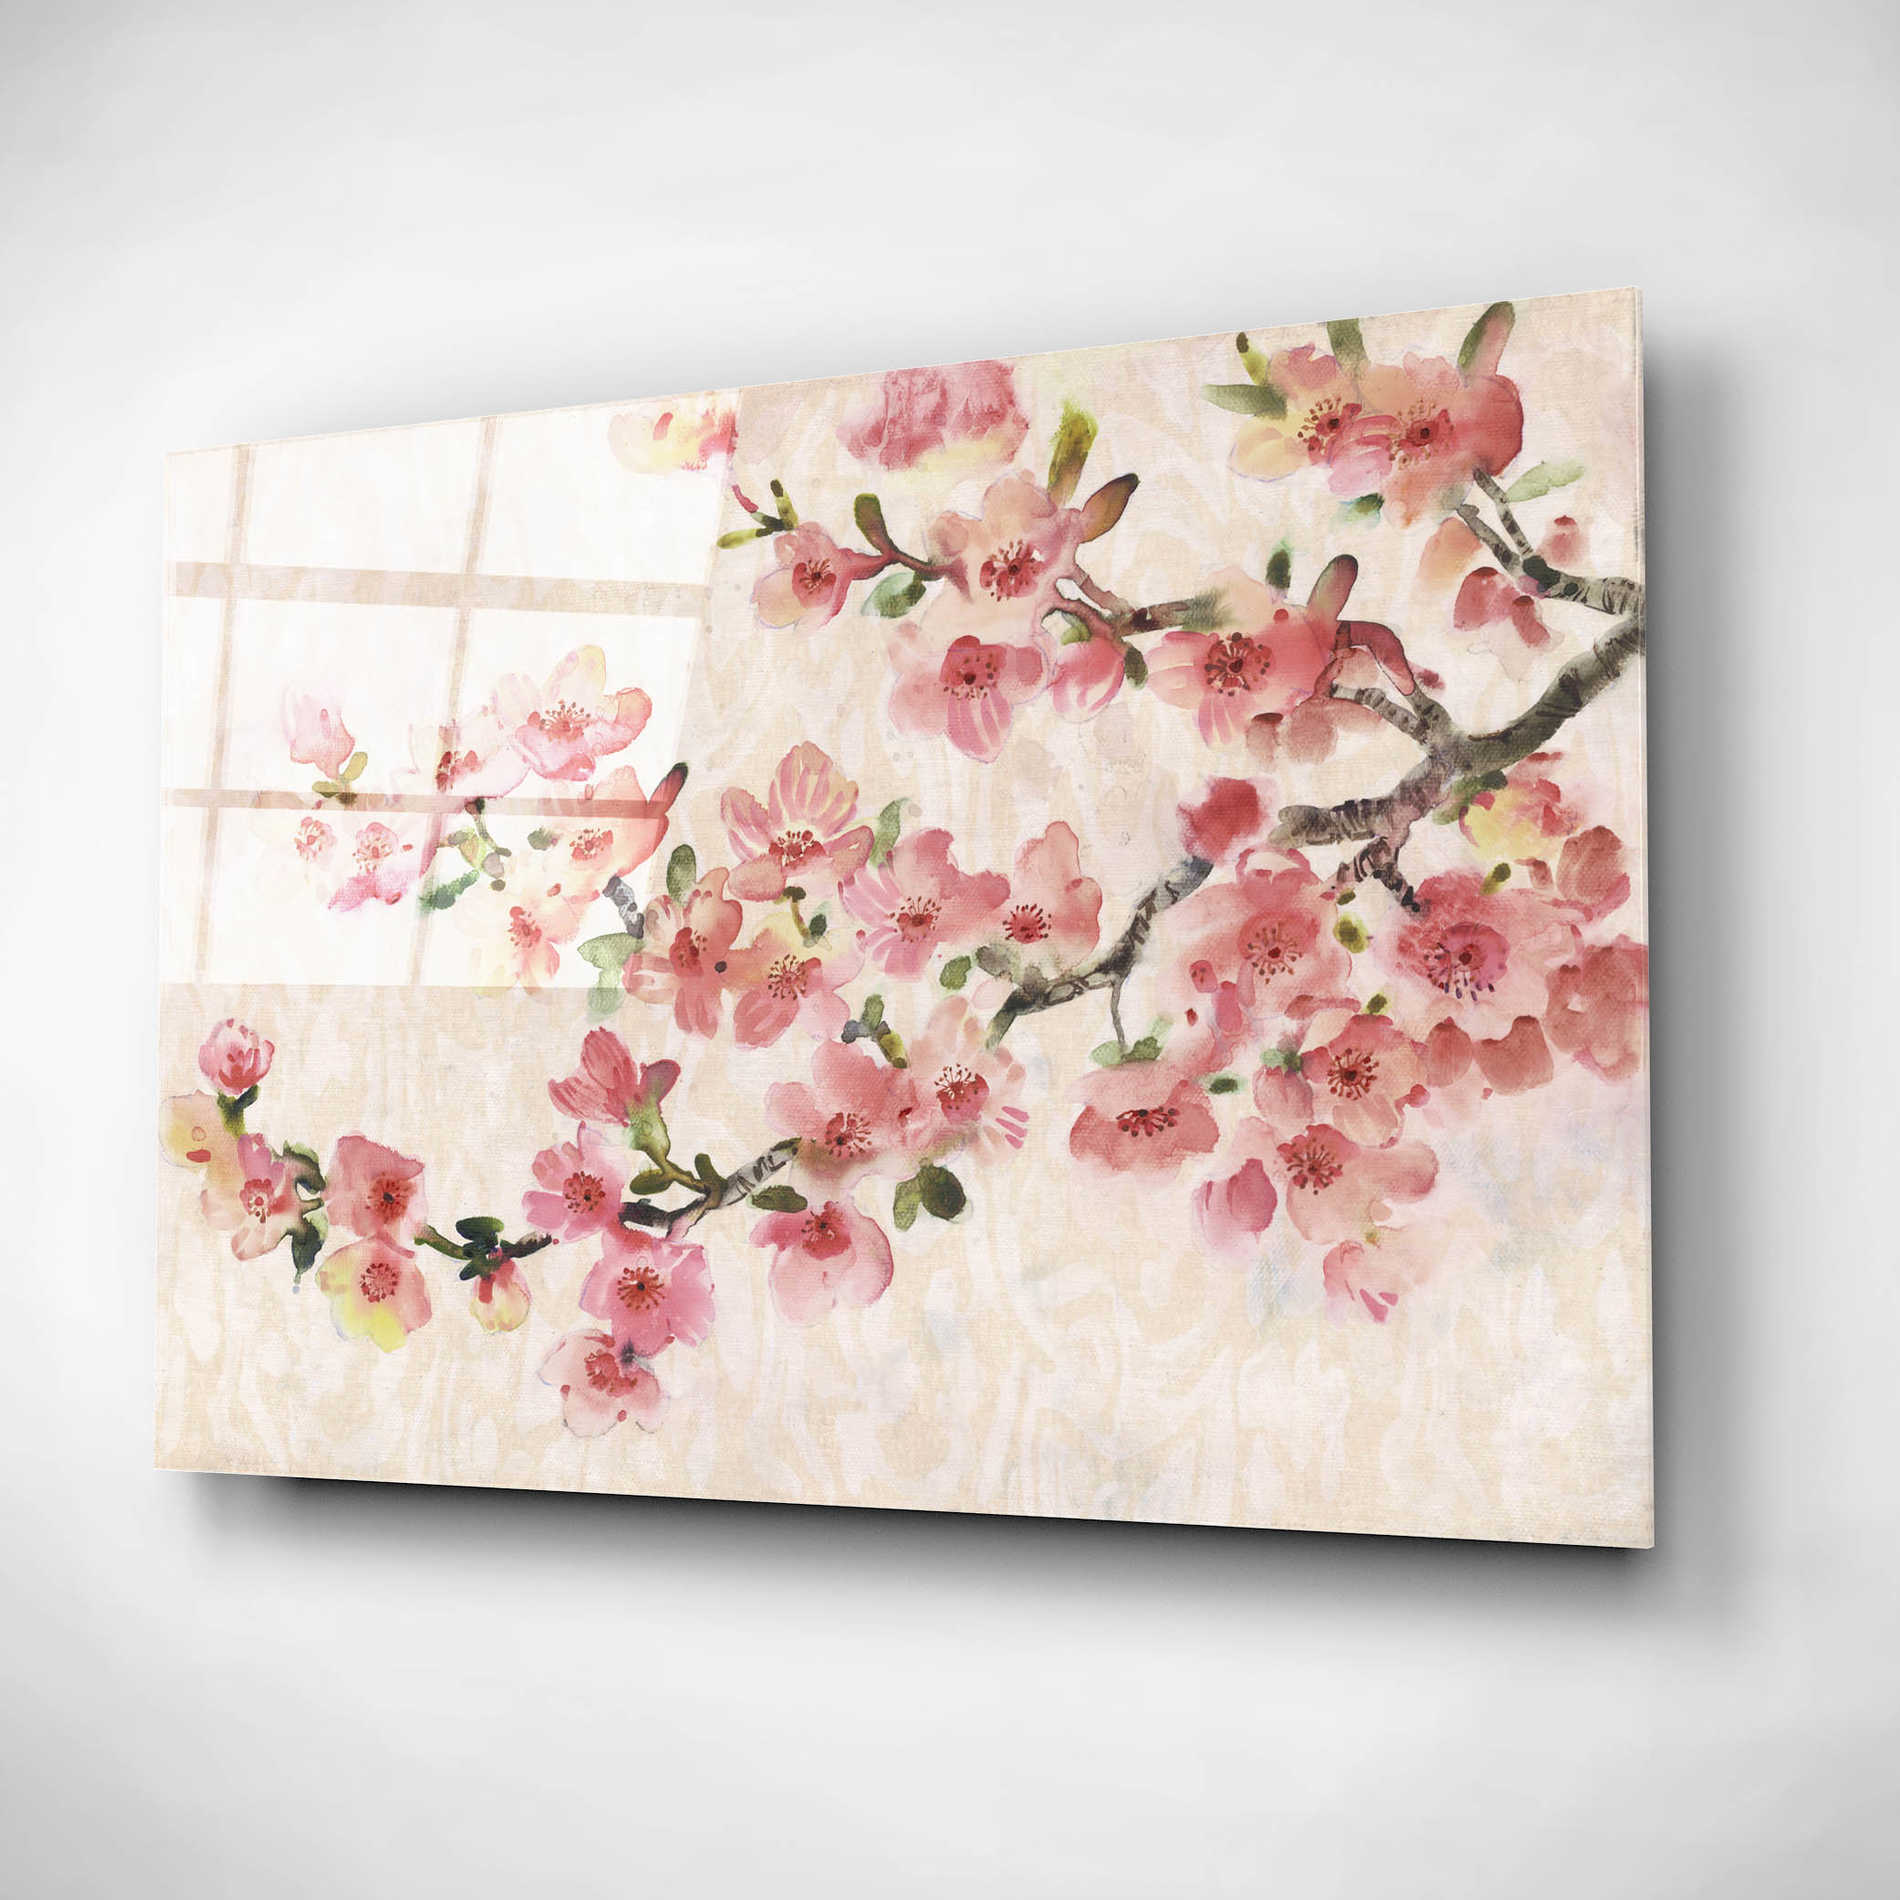 Epic Art 'Cherry Blossom Composition I' by Tim O'Toole, Acrylic Glass Wall Art,24x16